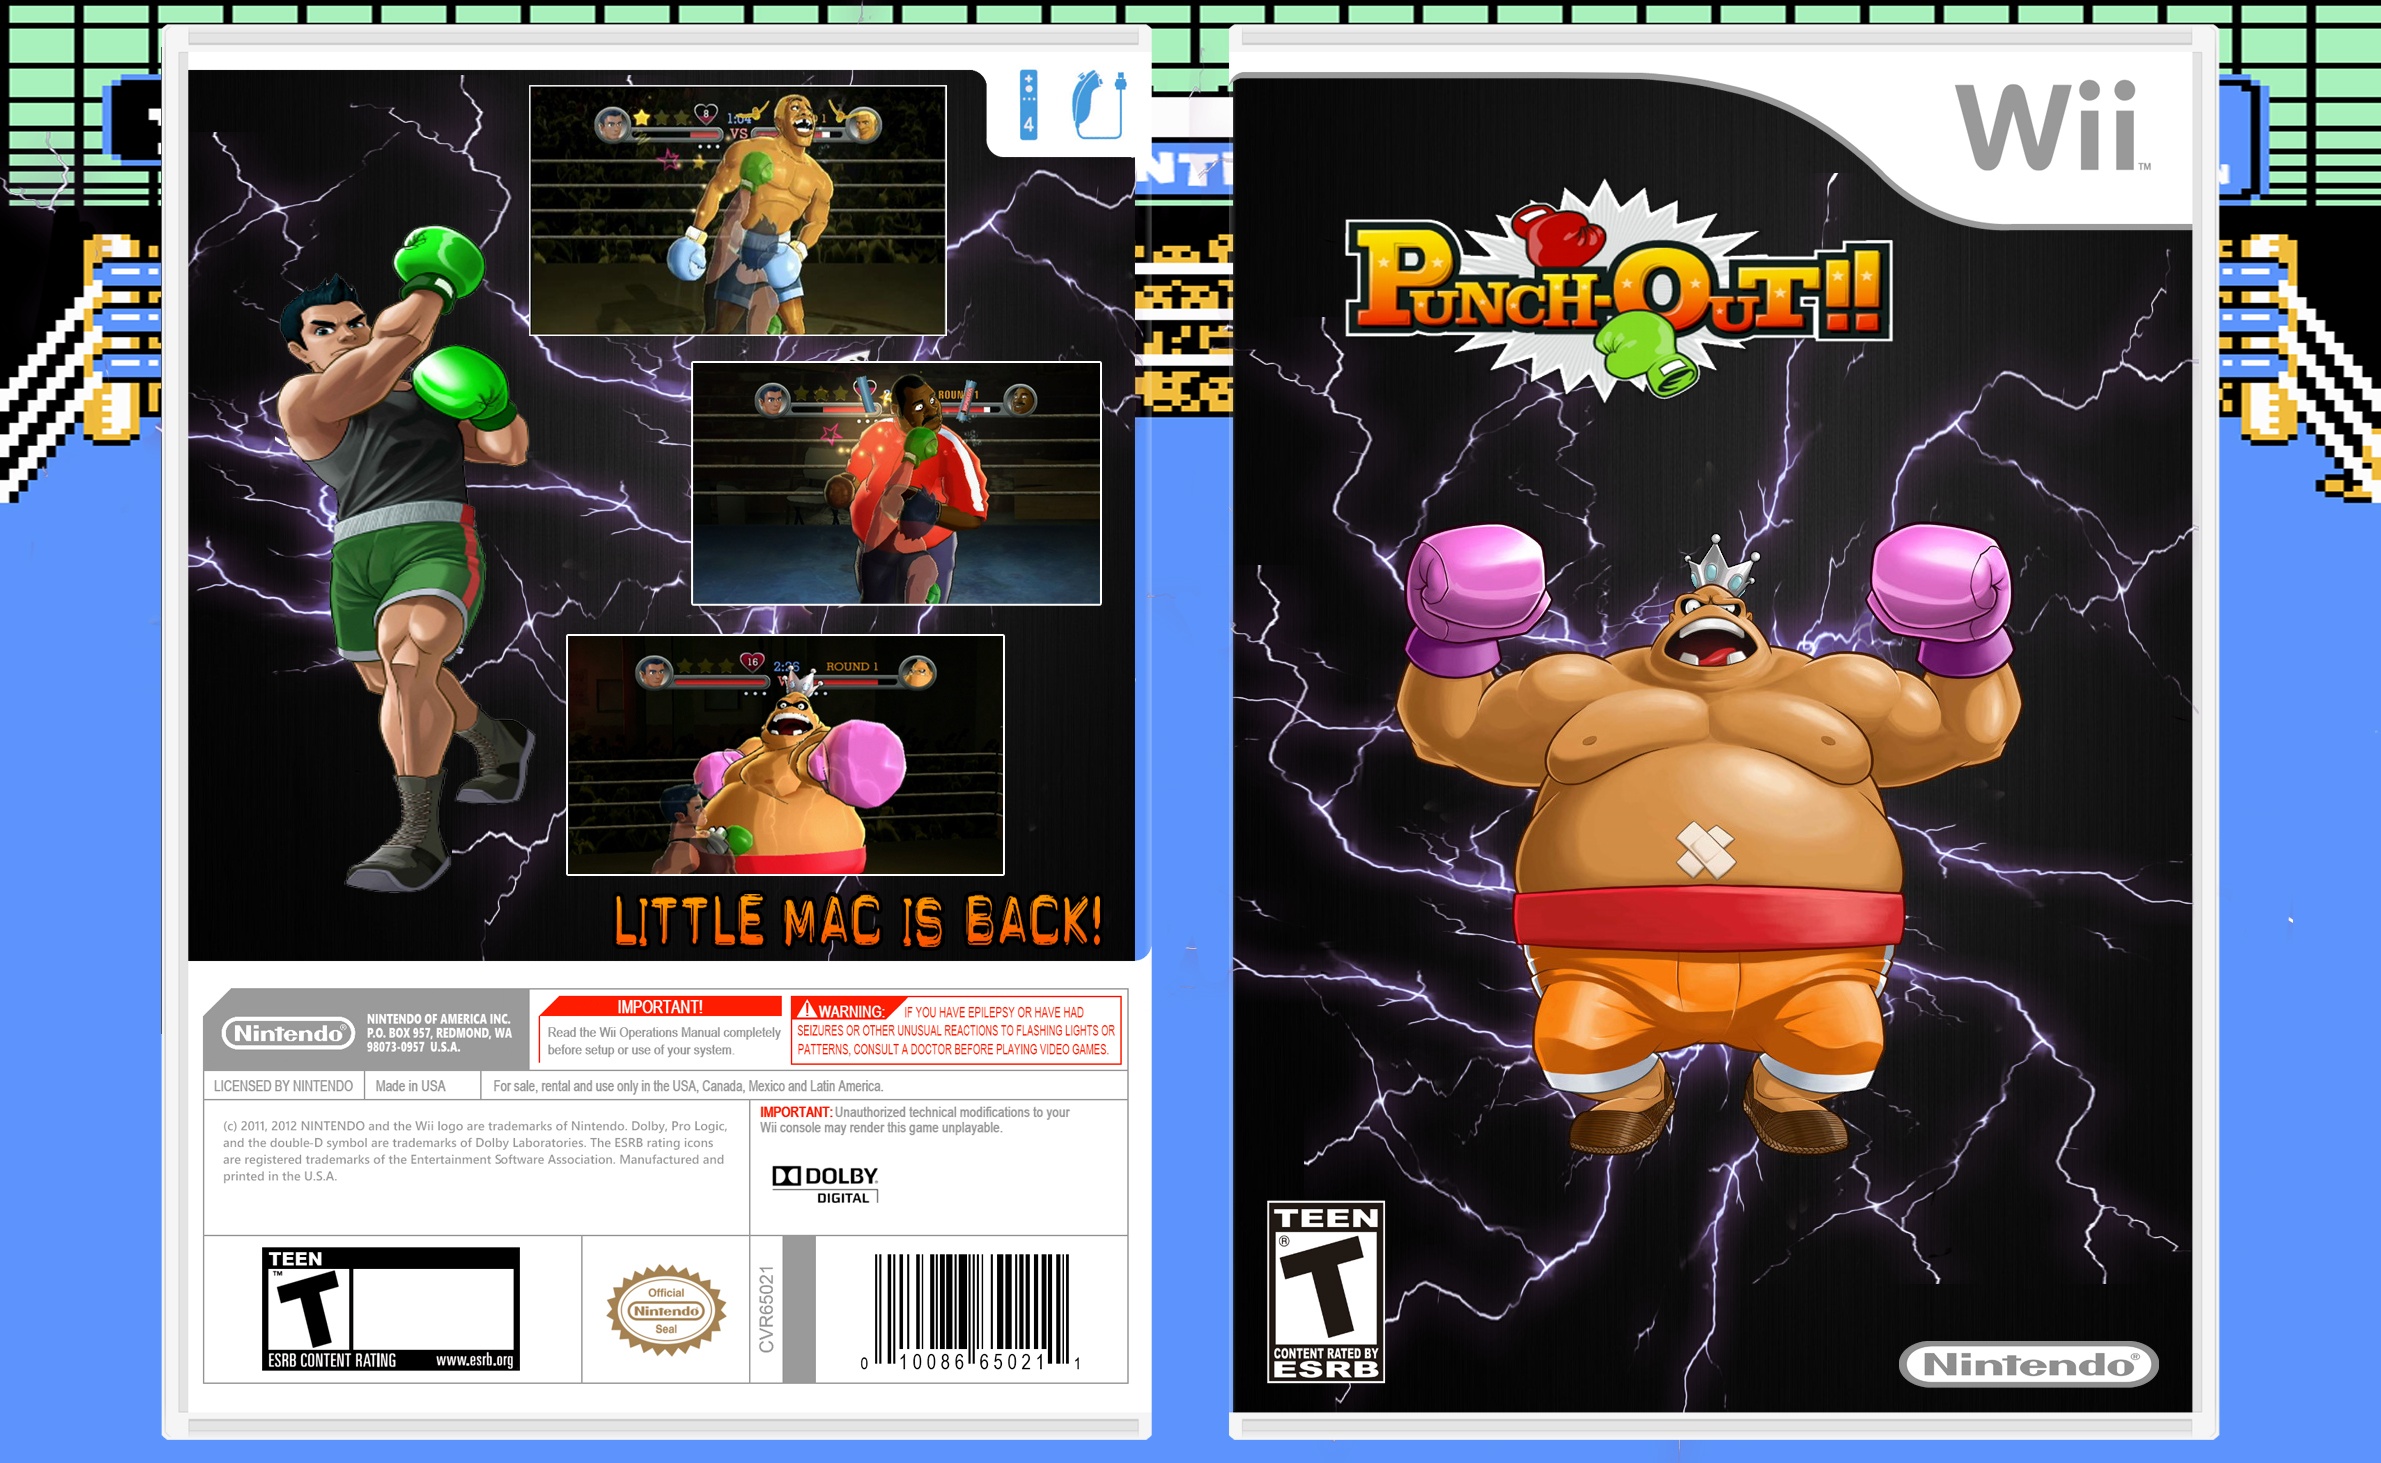 Punch-Out Wii box cover